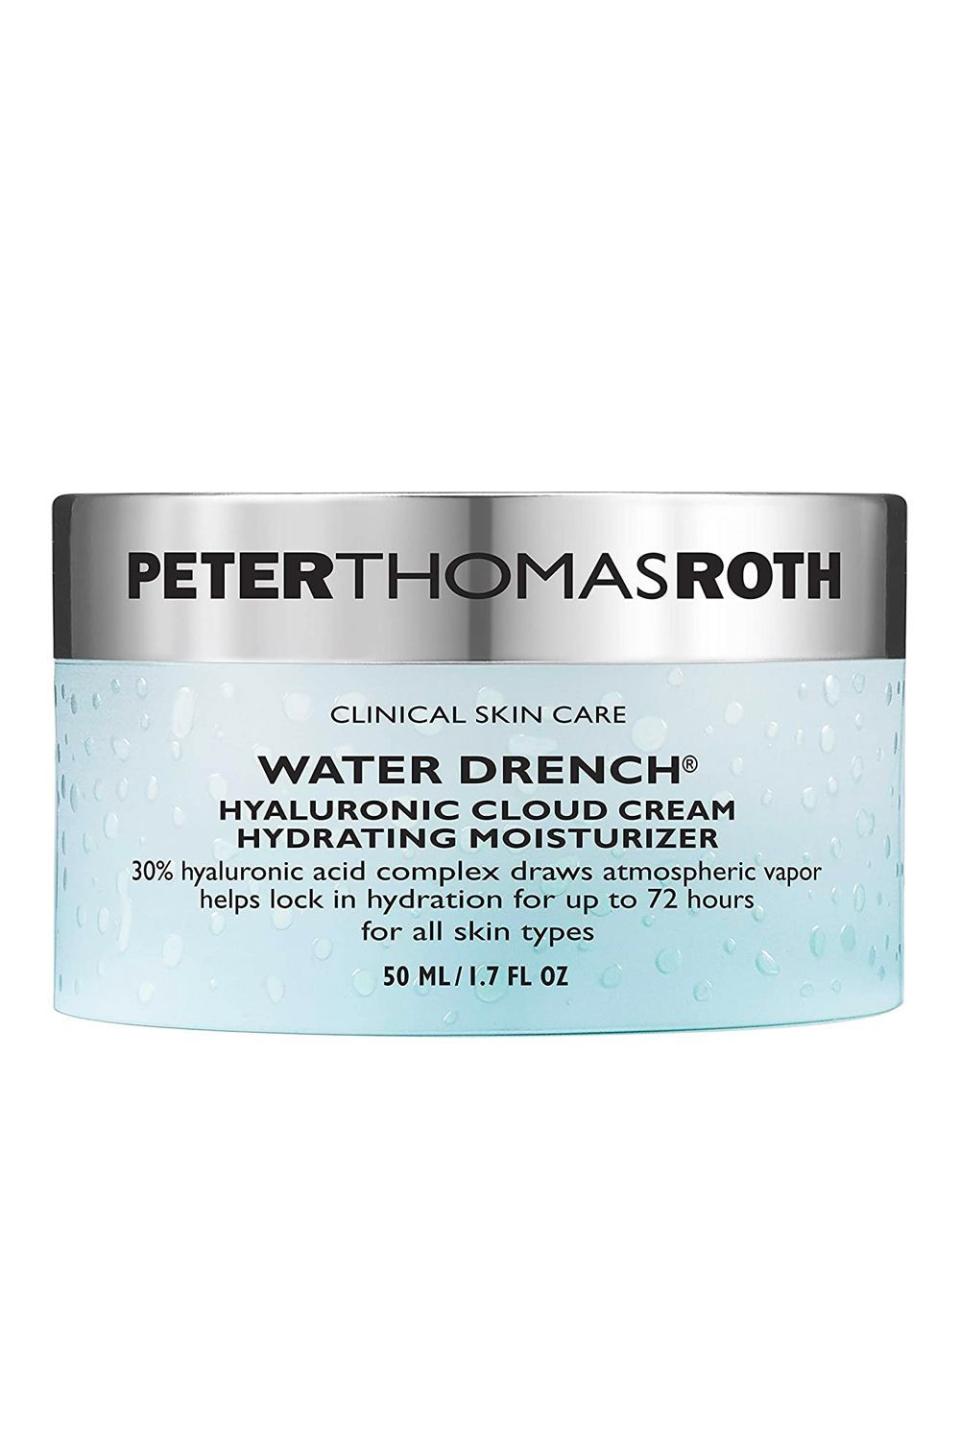 2) Peter Thomas Roth Water Drench Hyaluronic Cloud Cream